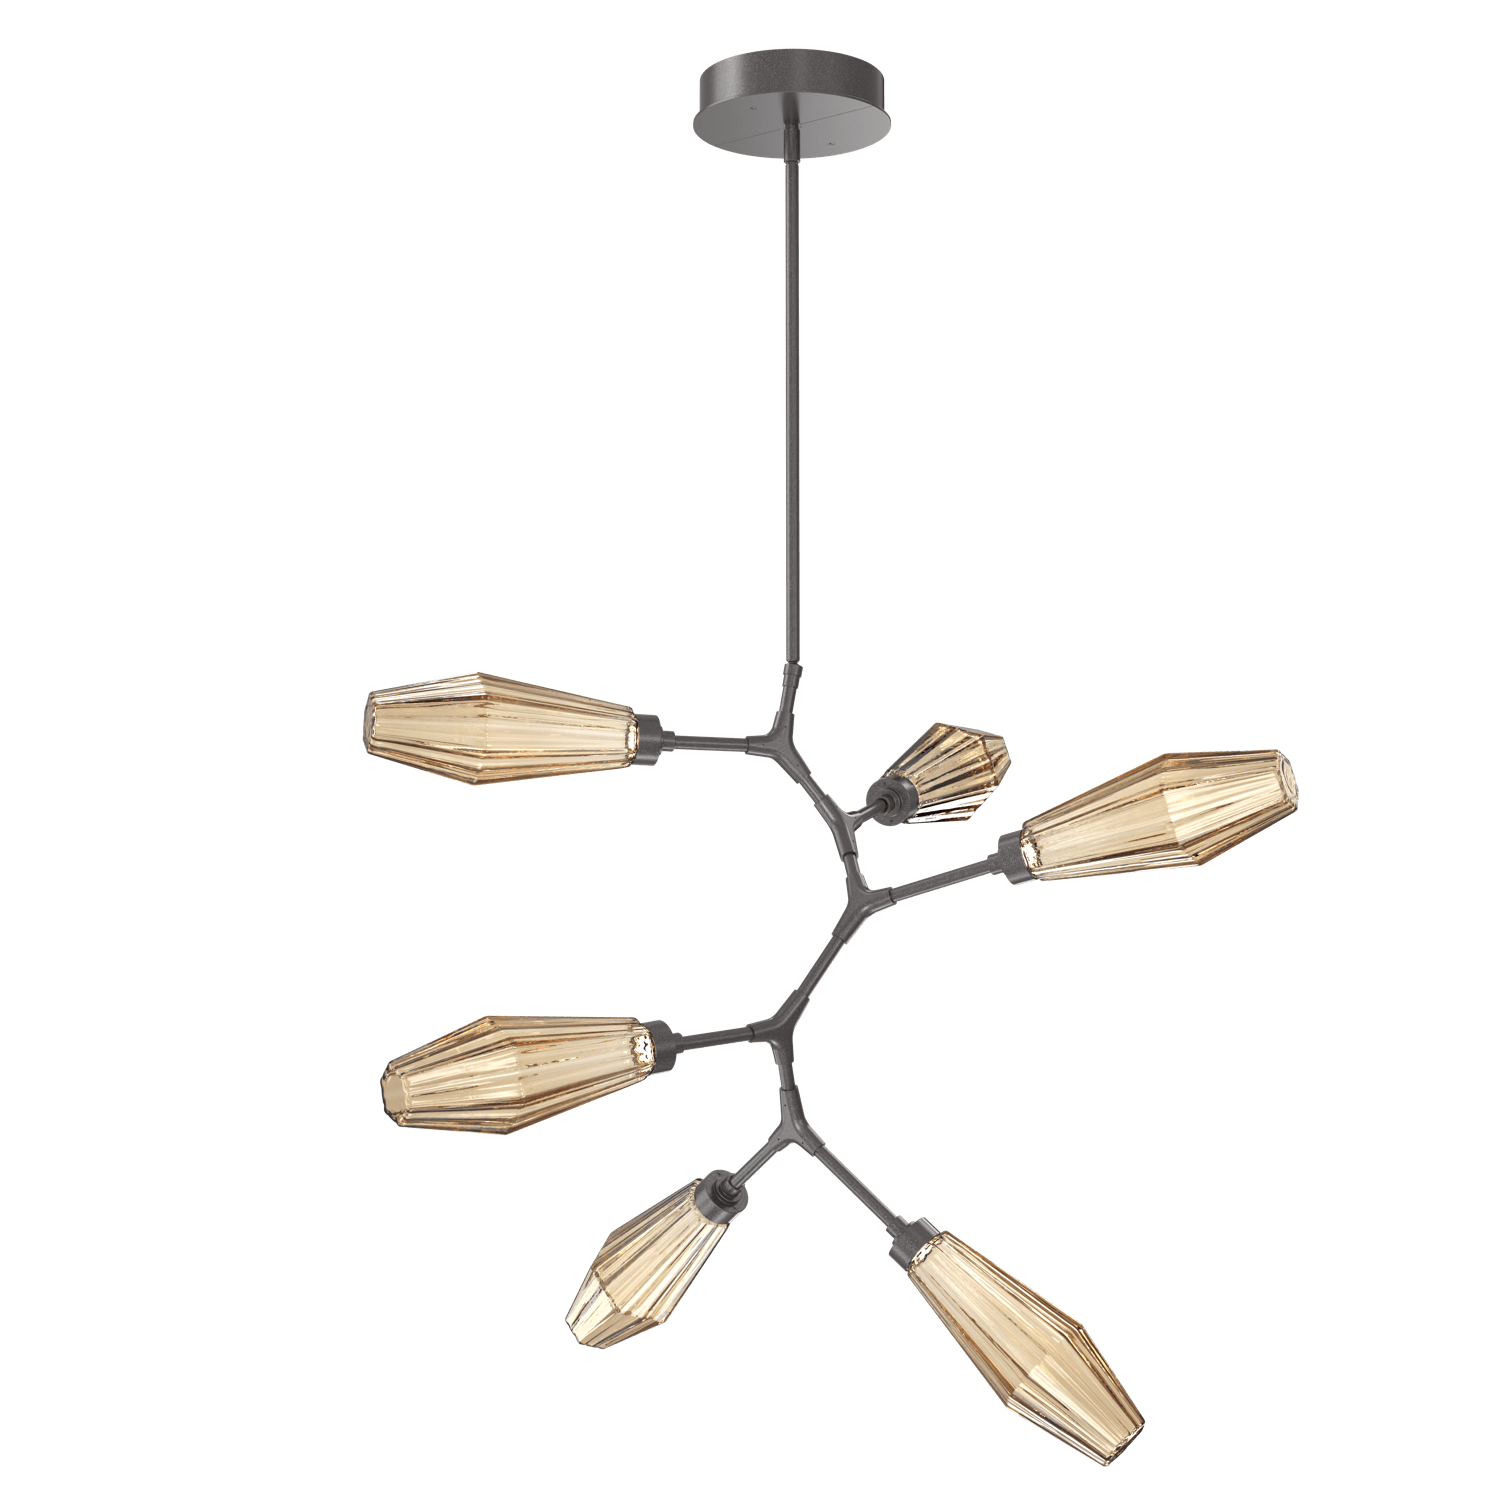 CHB0049-VA-GP-RB-Hammerton-Studio-Aalto-6-light-modern-vine-chandelier-with-graphite-finish-and-optic-ribbed-bronze-glass-shades-and-LED-lamping